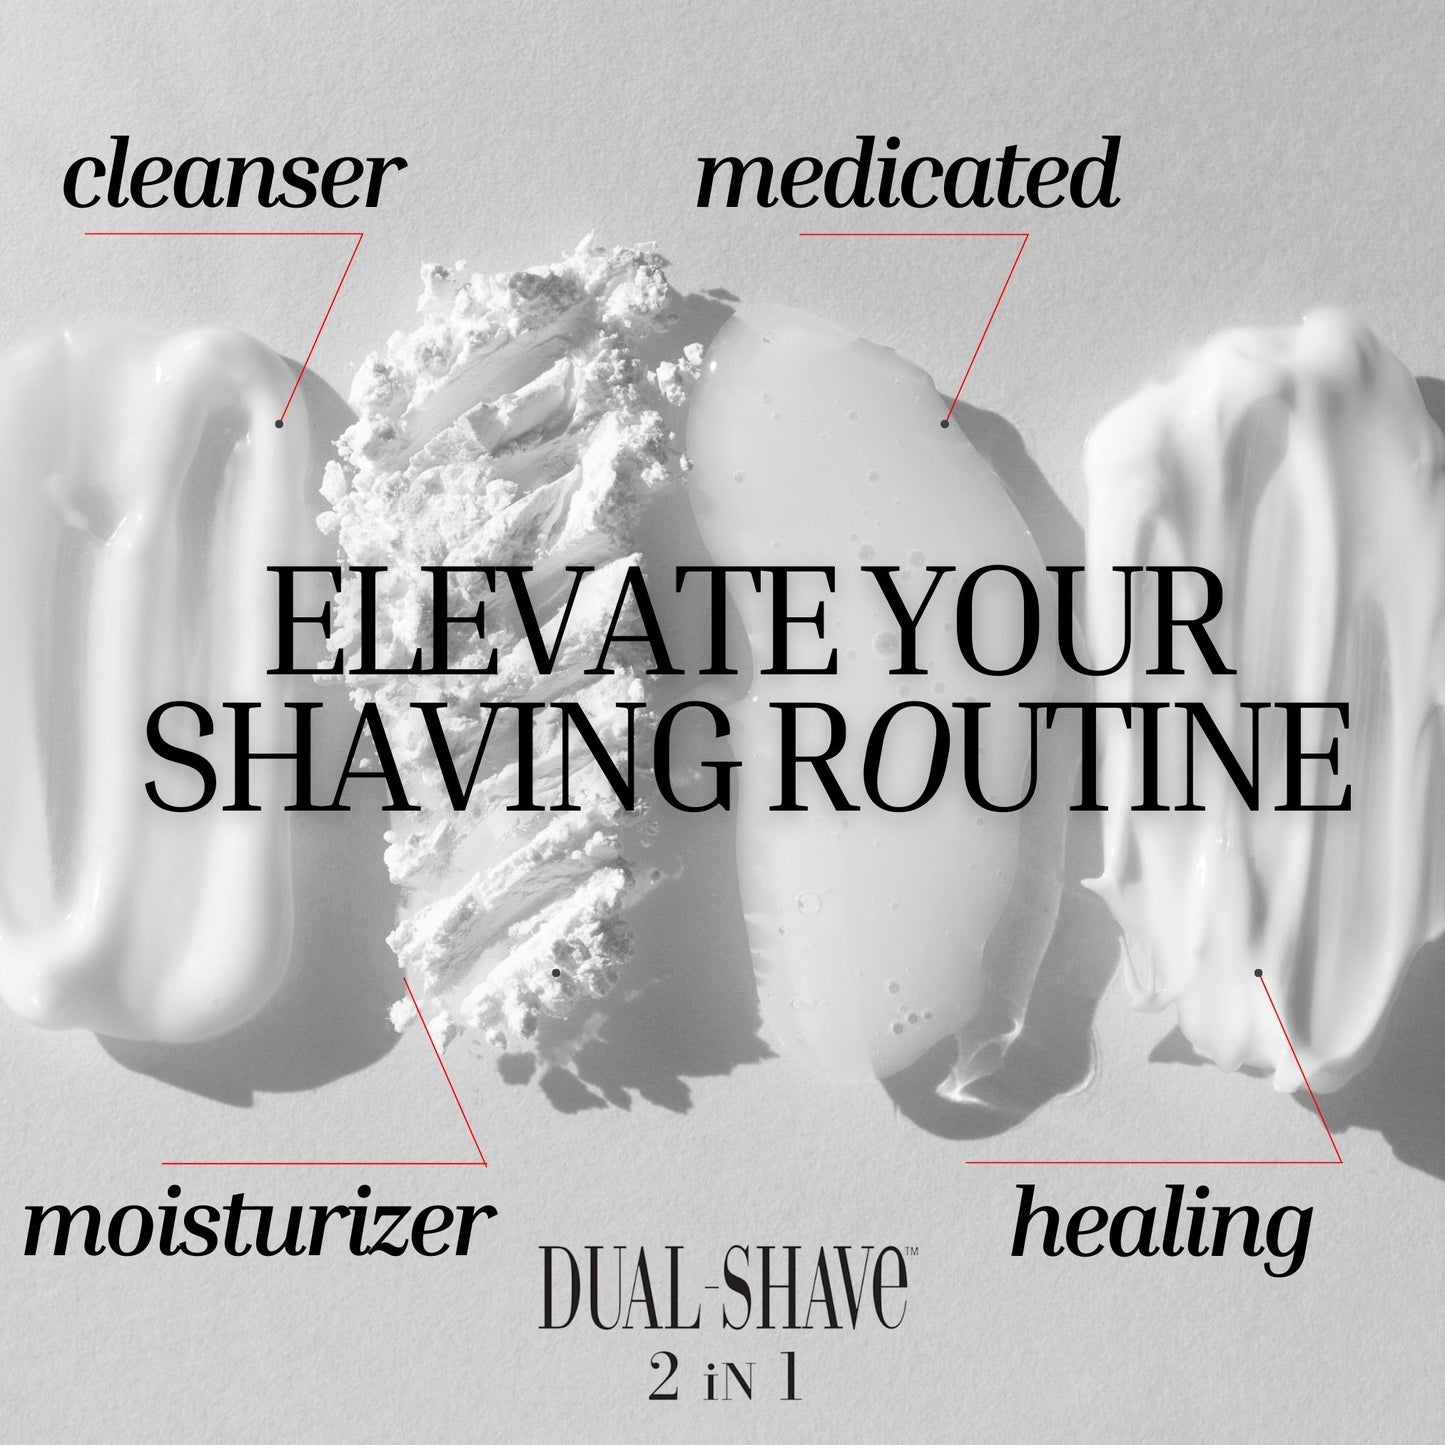 Dual-Shave (HIS) Travel 3.4 oz Medicated 2-in-1 Shaving Cream & Facial Soap